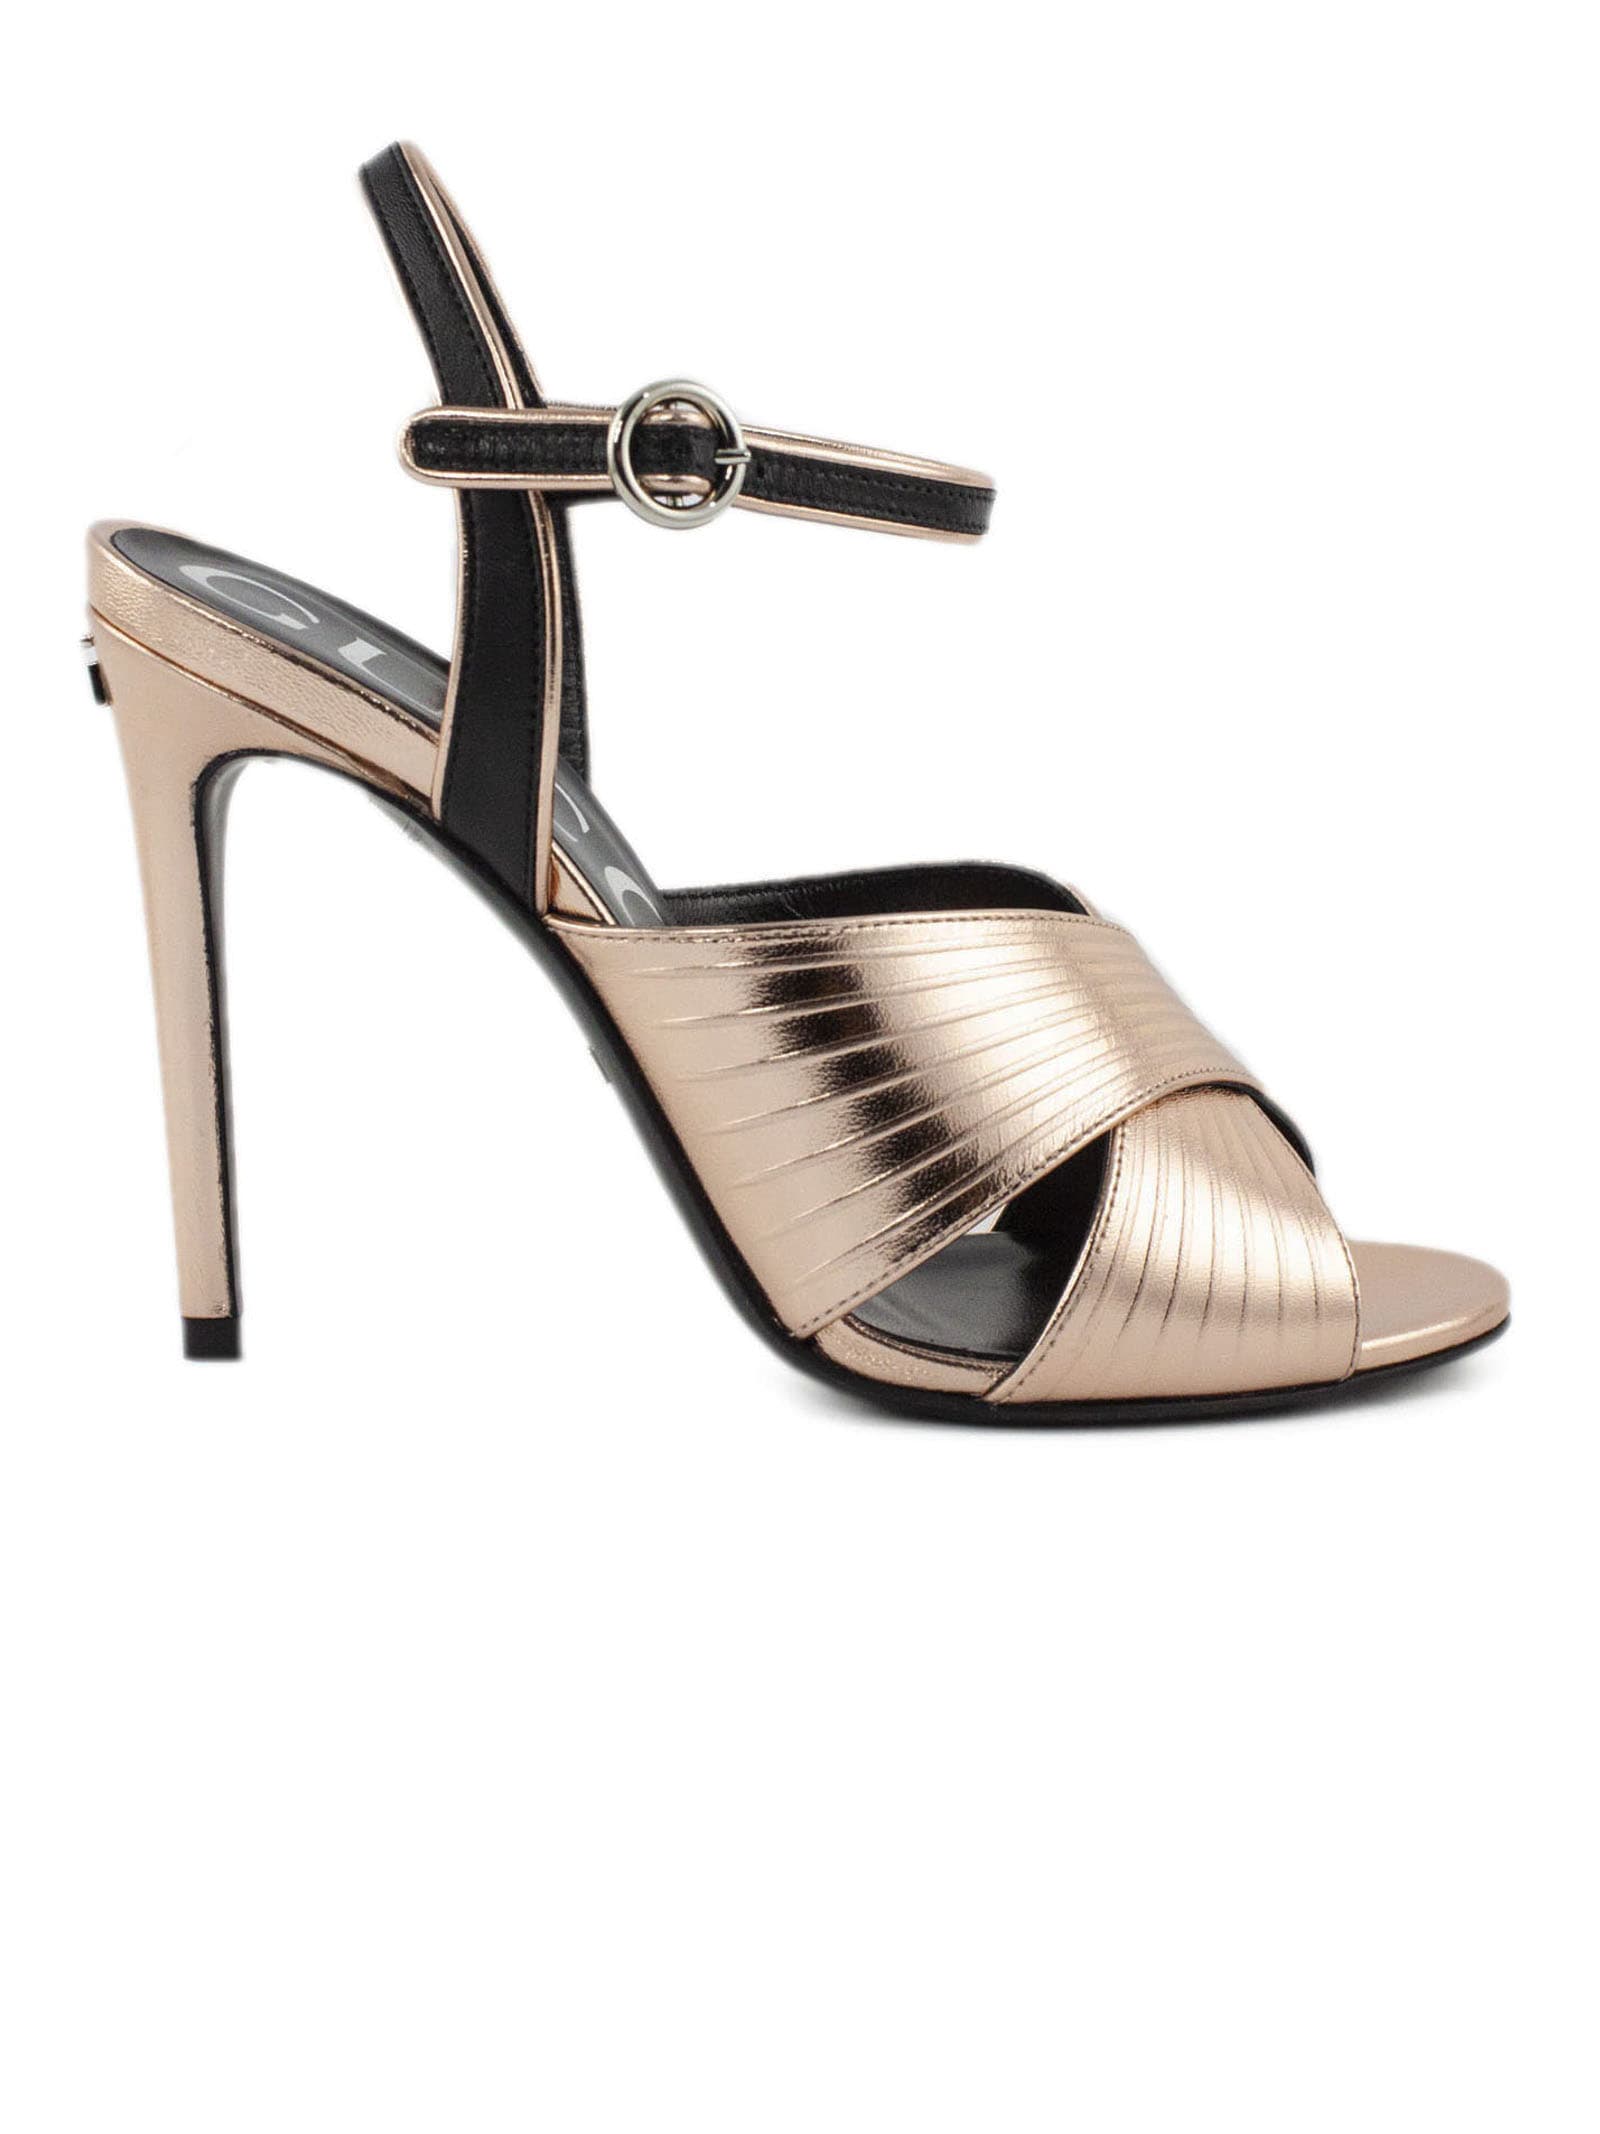 Buy Gucci Salmon Metallic Leather Sandals online, shop Gucci shoes with free shipping